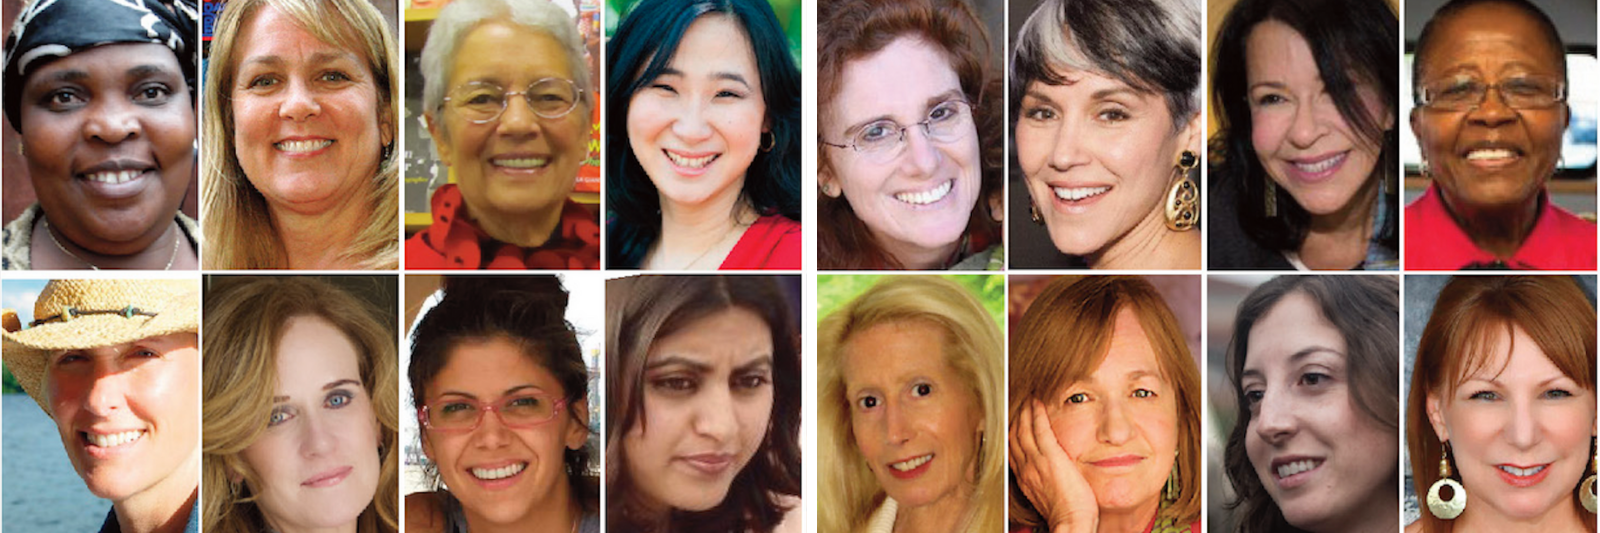 Get Updates from The Women's Eye with background photo featuring some of the women featured in 20 Women Changemakers with co-editors Pamela Burke and Patricia Caso of The Women's Eye